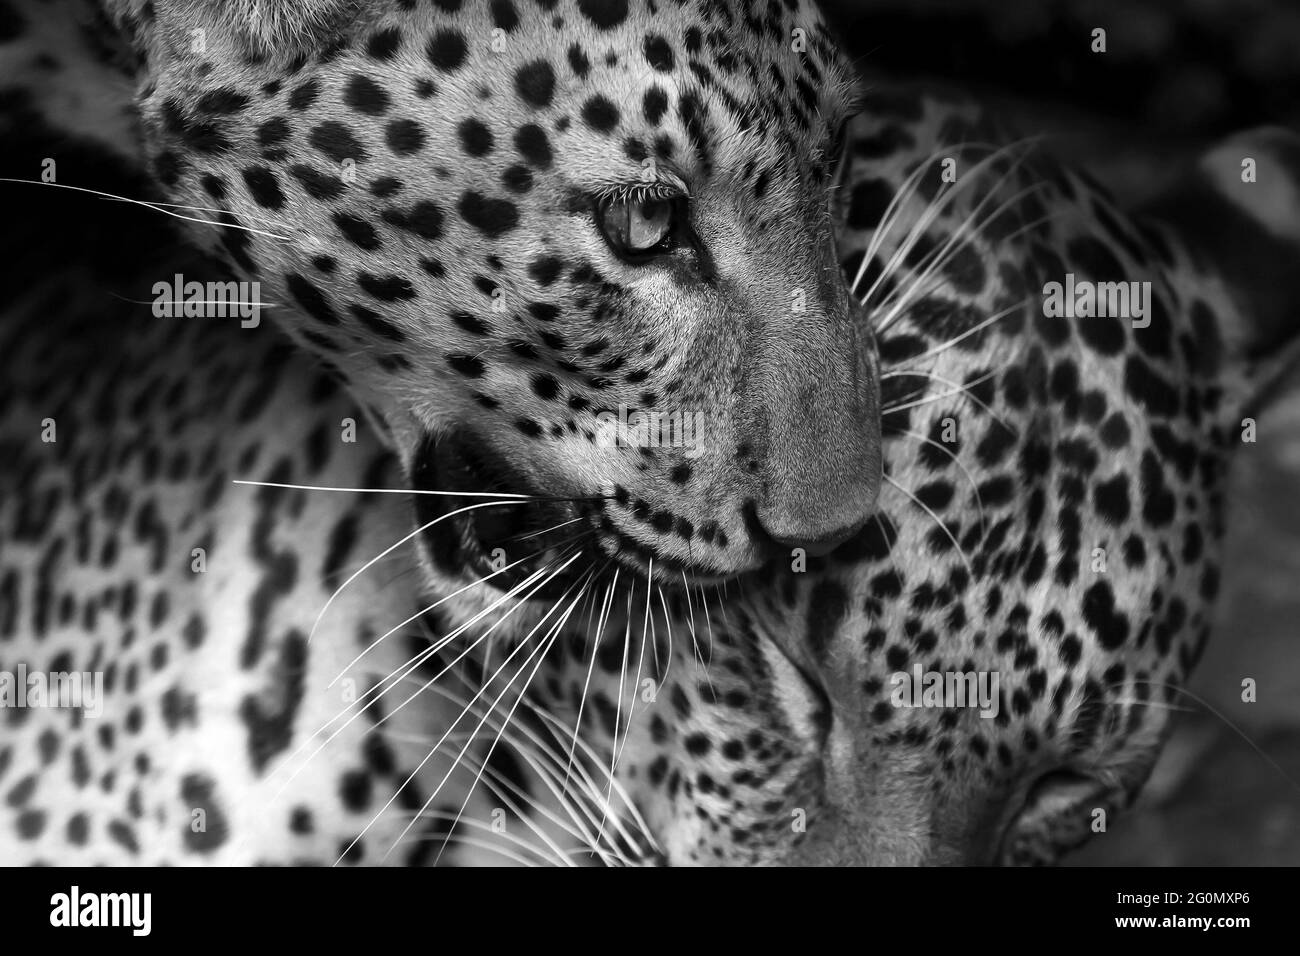 Couple Indochinese leopard grooming in the cave. Monochrome Focus on leopard head. Stock Photo